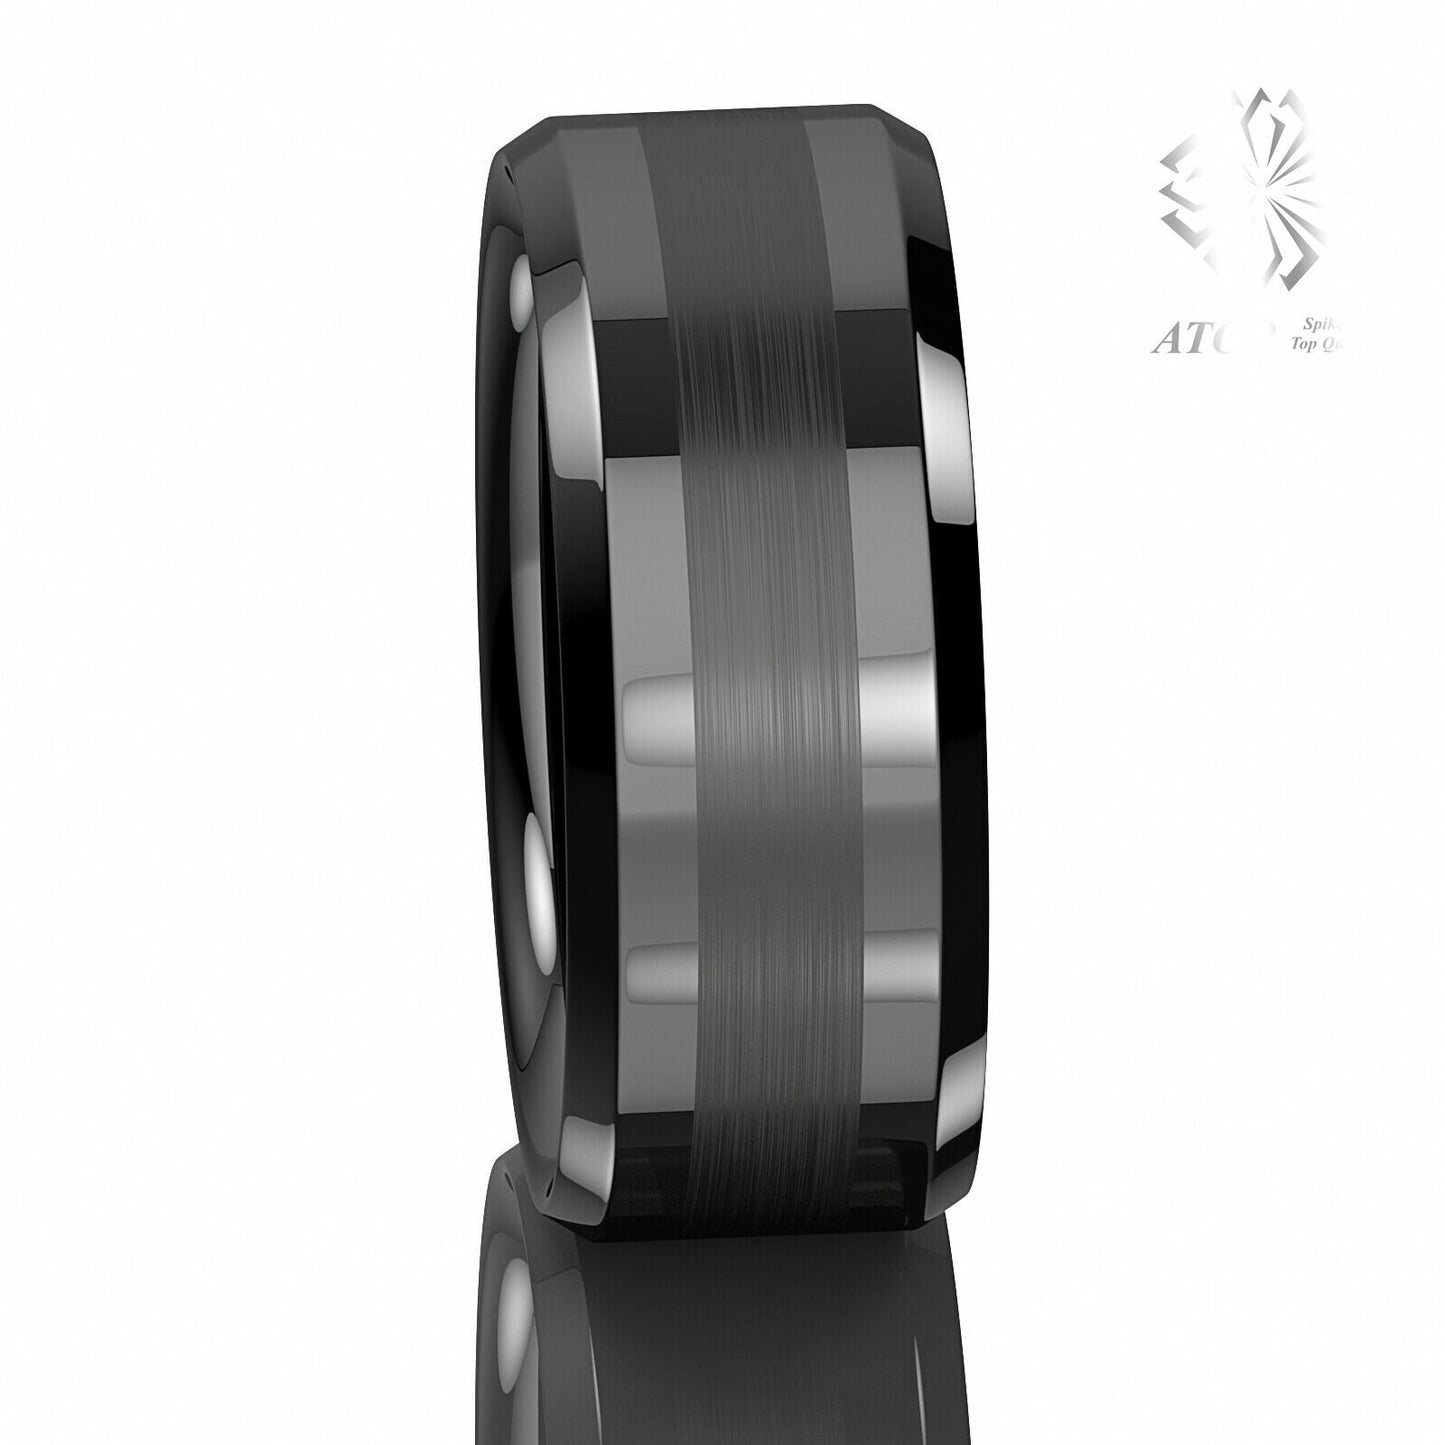 Brushed Centre Black Tungsten Carbide Ring